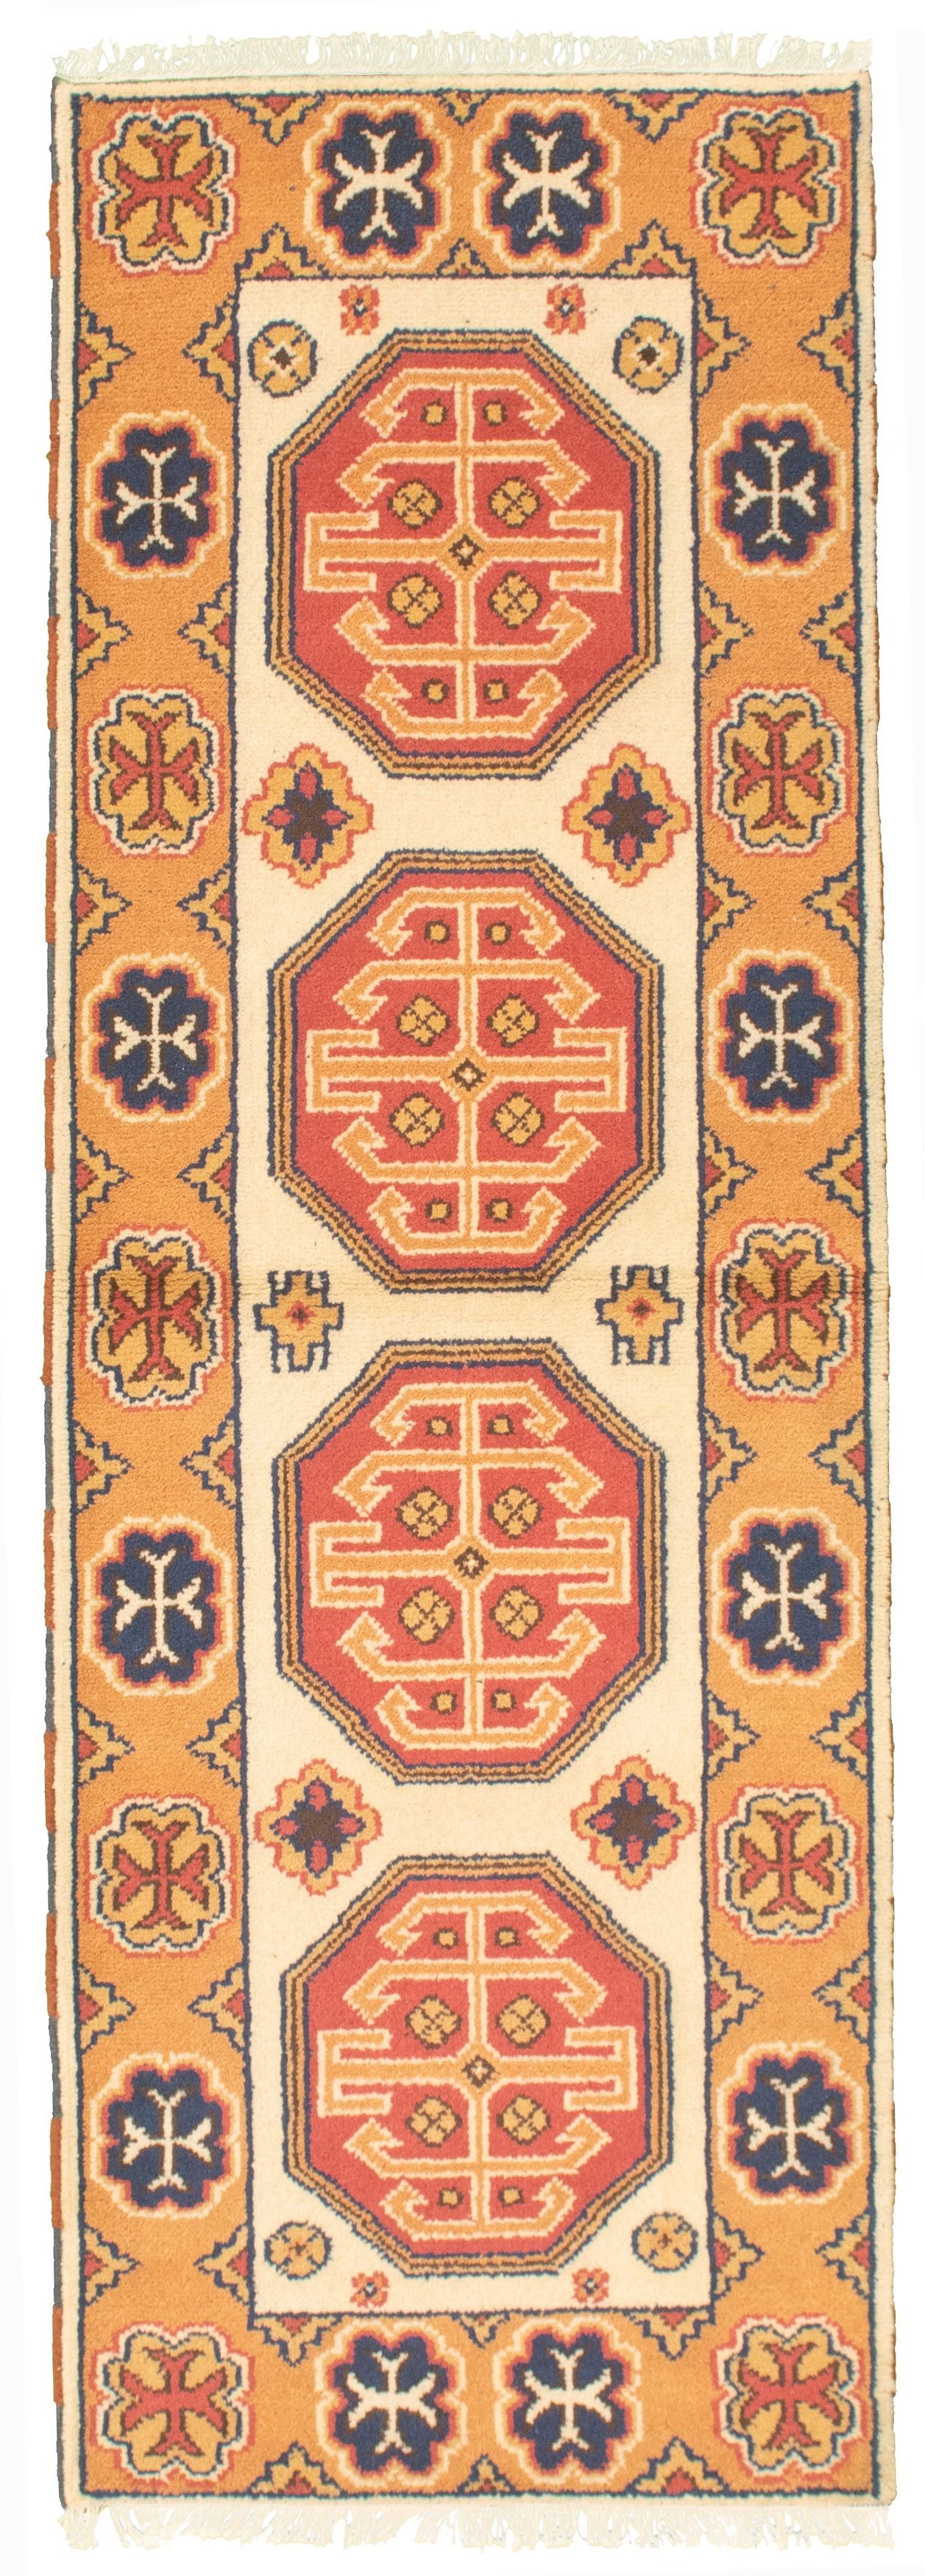 Hand-knotted Royal Kazak Copper, Light Red Wool Rug 2'10" x 8'1" Size: 2'10" x 8'1"  